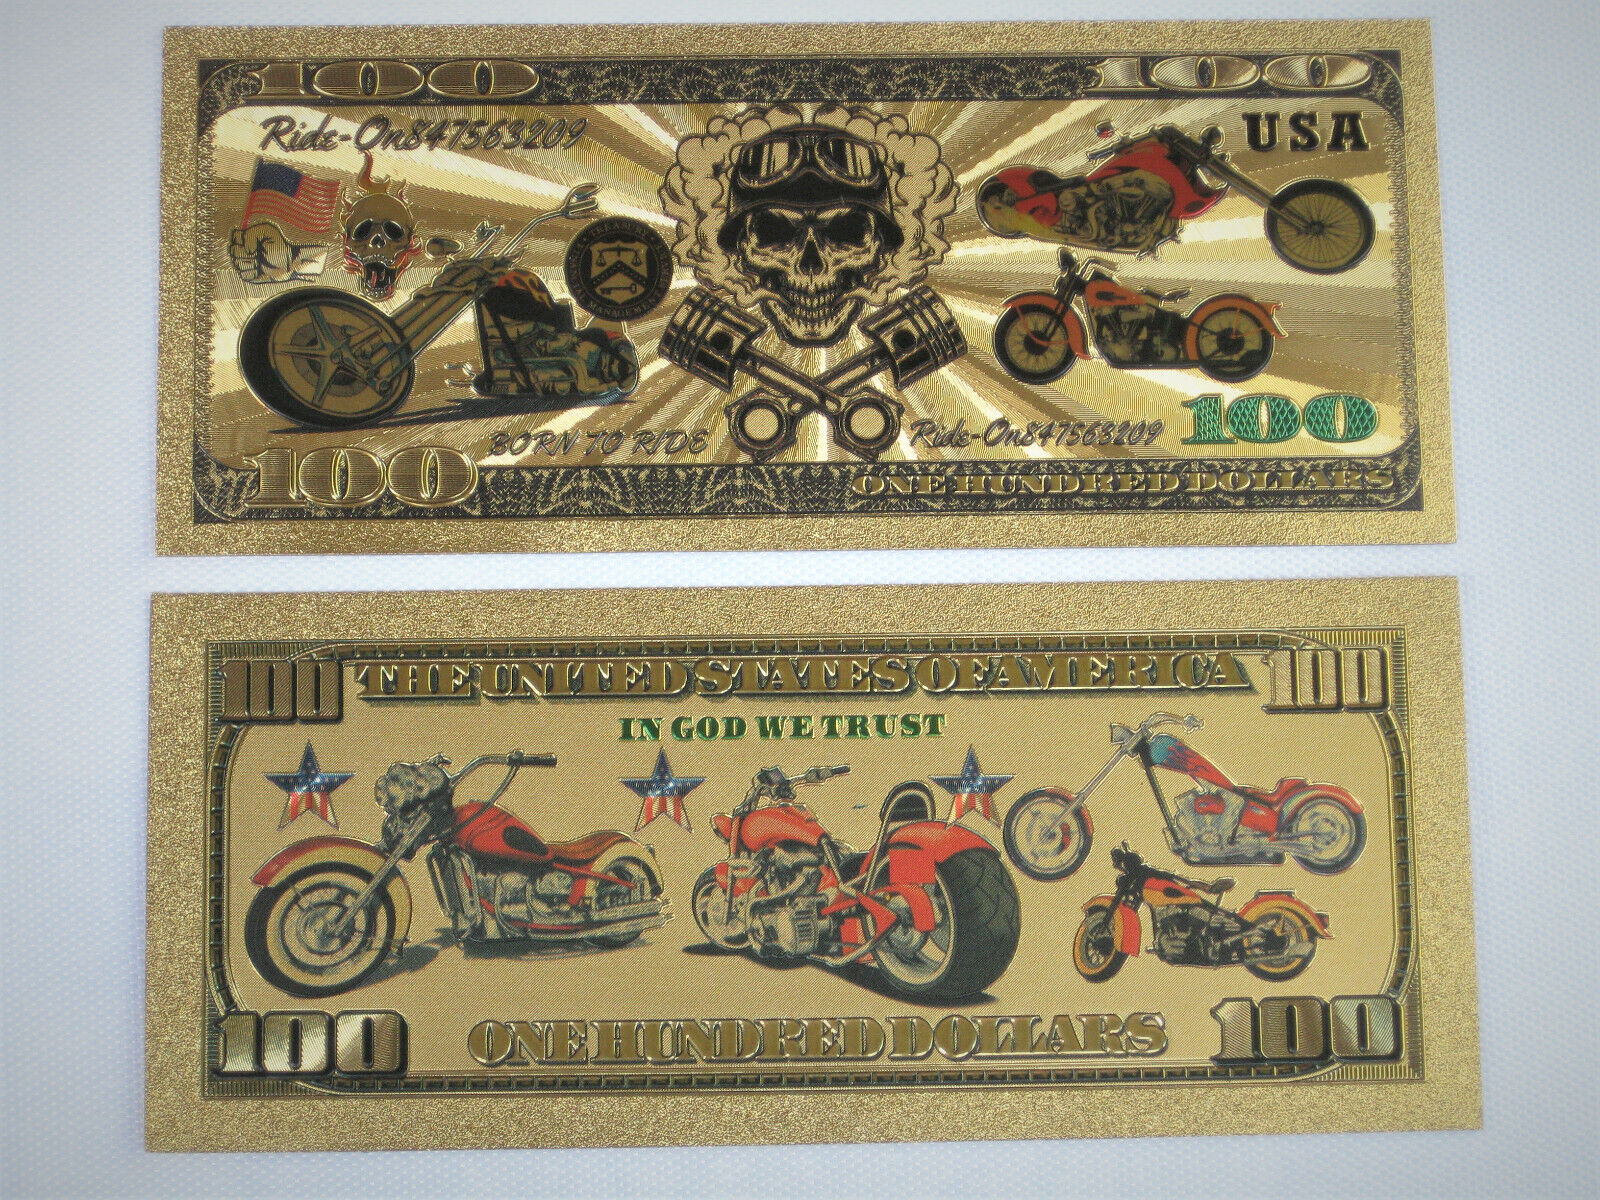  Biker Banknote Harley Indian Gas Oil Sign Motor Chopper Tail Sturgis Tank Pipes